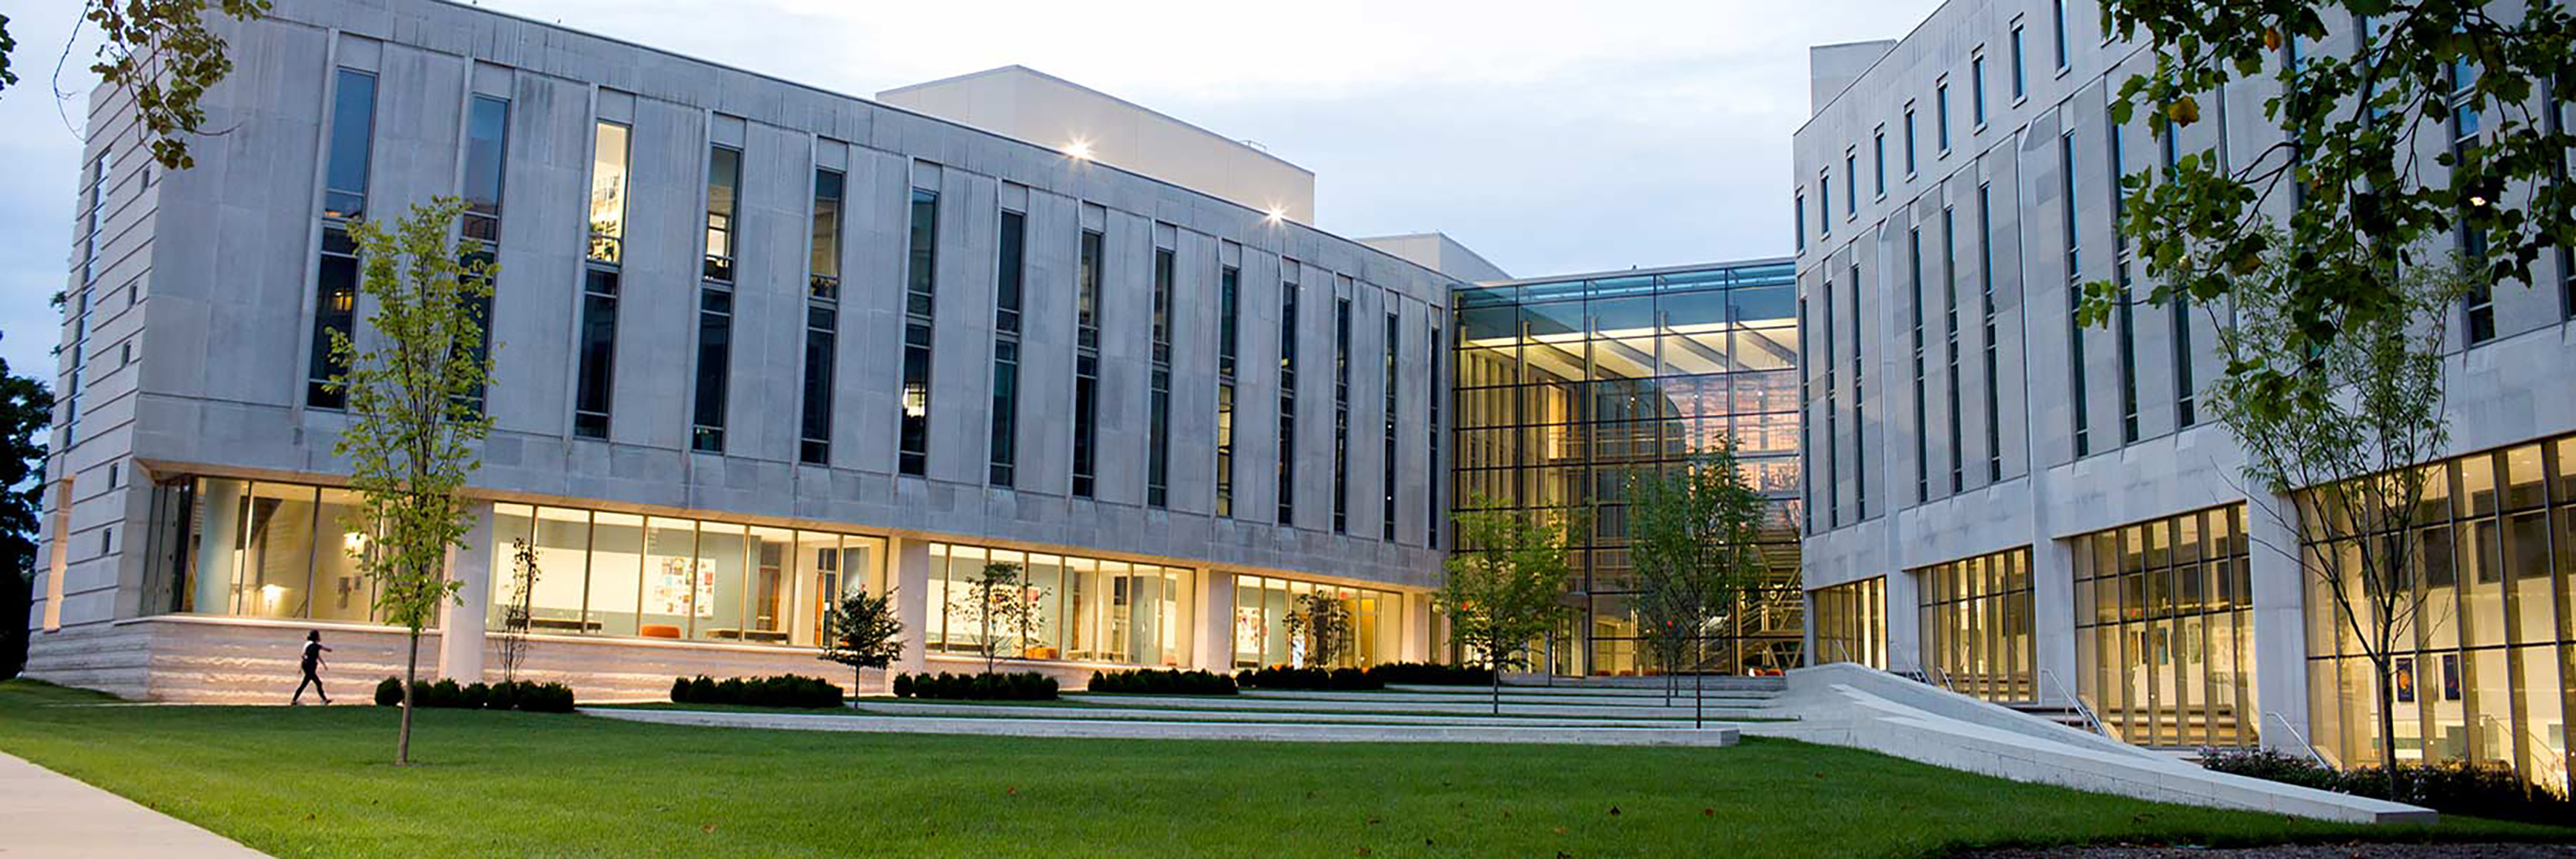 Exterior view of the Global and International Studies Building